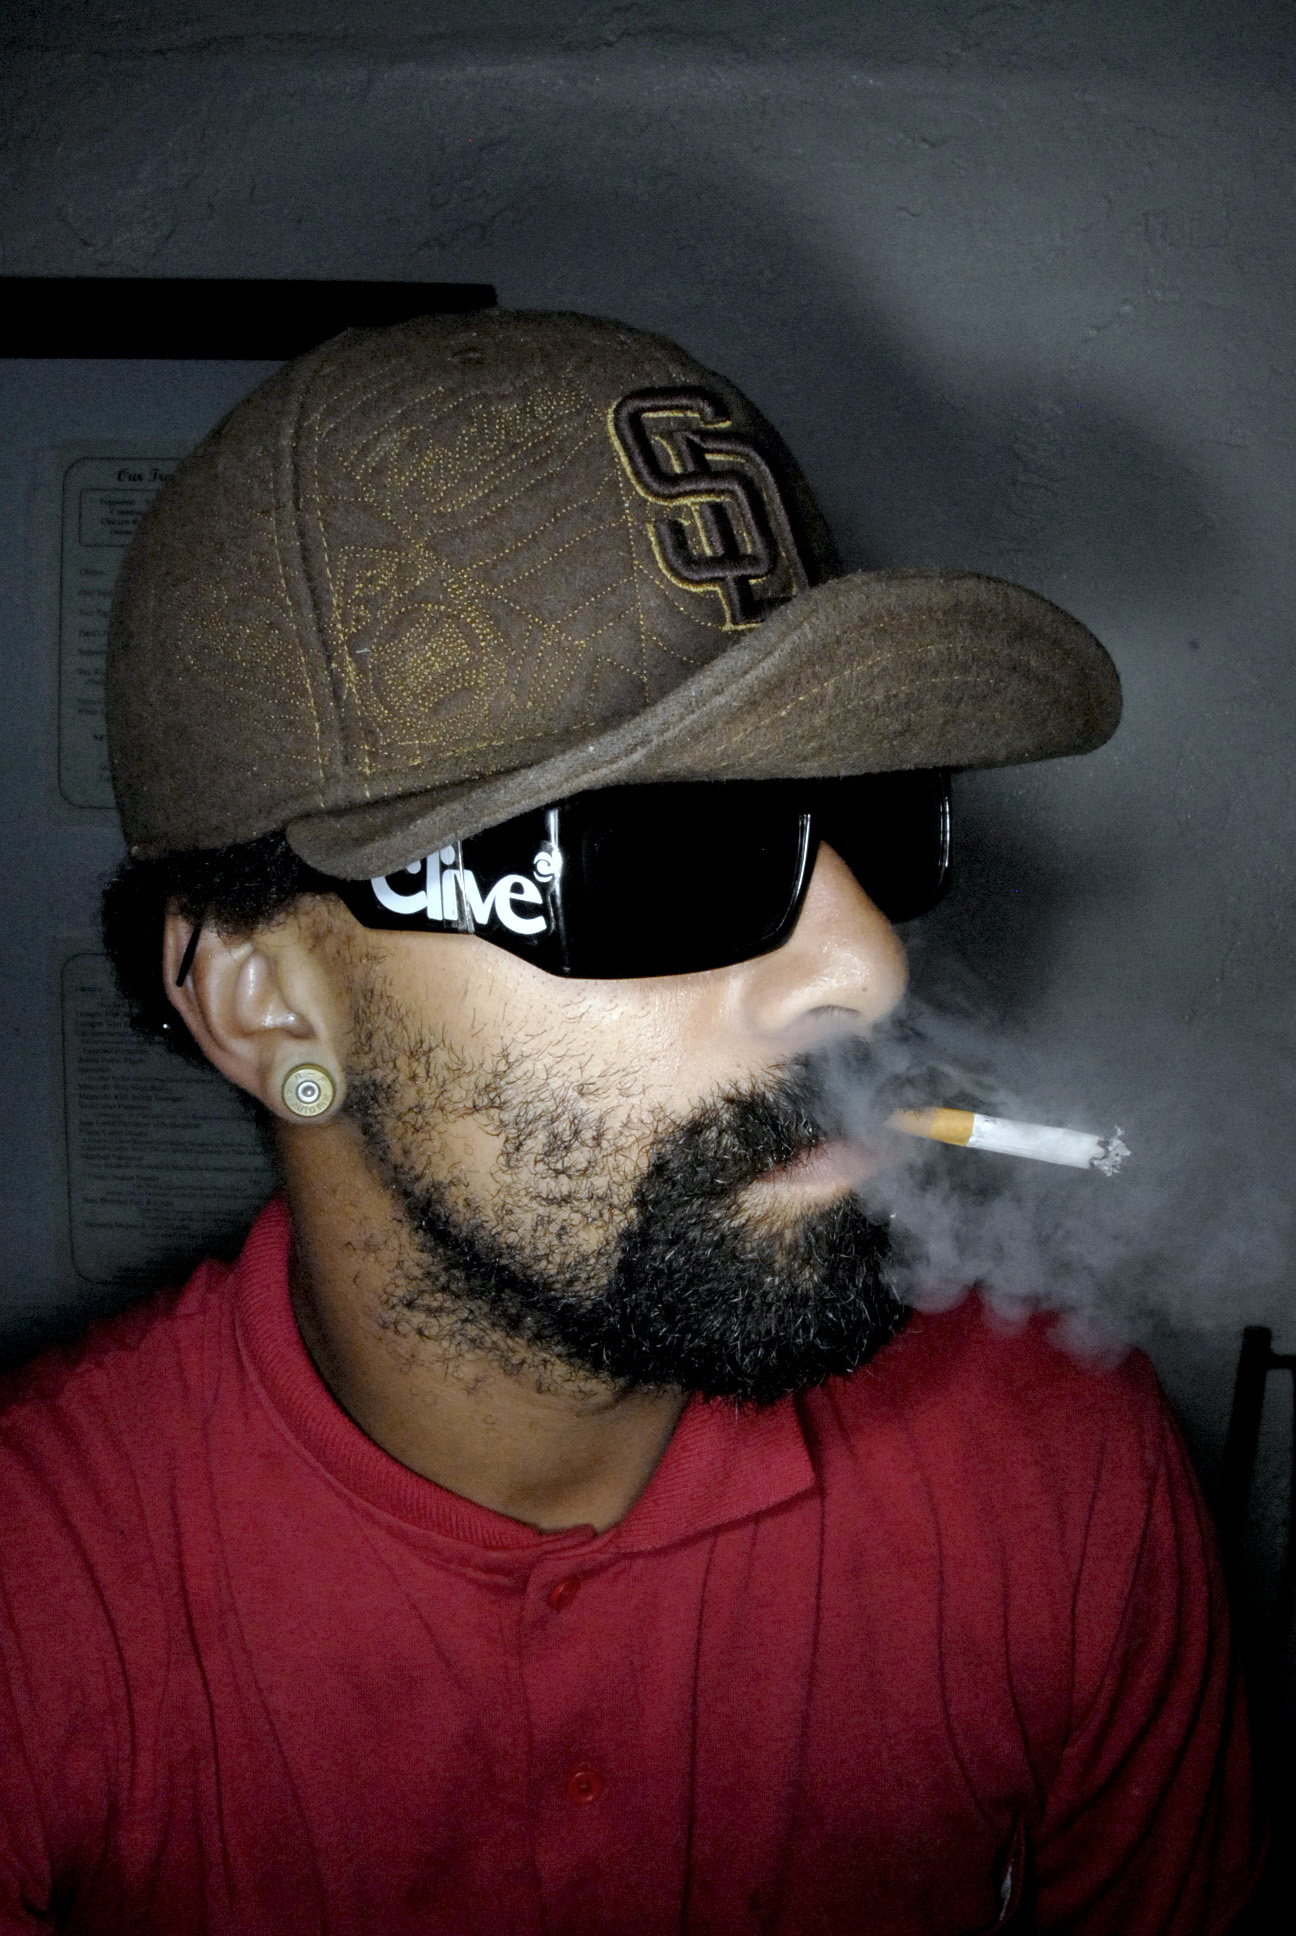 a man wearing sunglasses and a hat smoking a cigarette